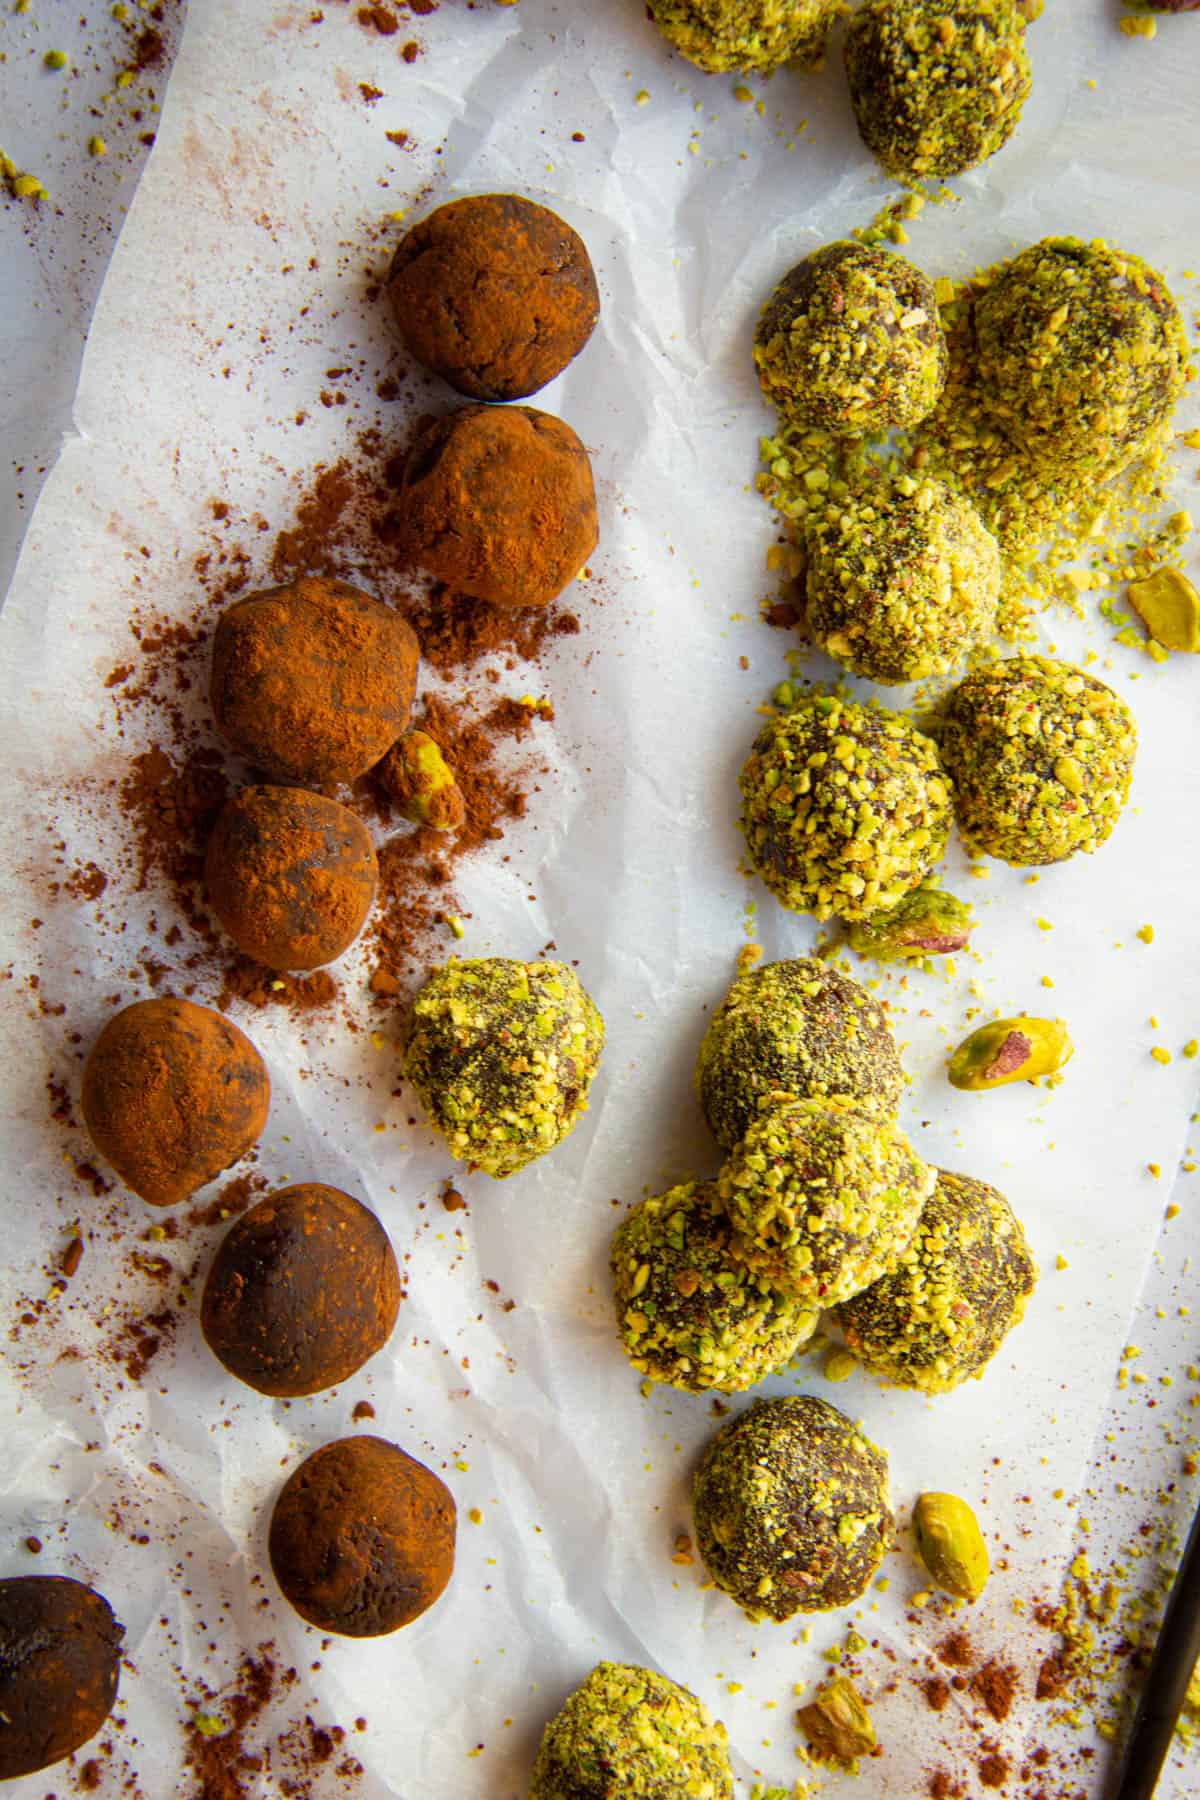 Vegan chocolate truffles with pistachio and cocoa powder on a marble slab.